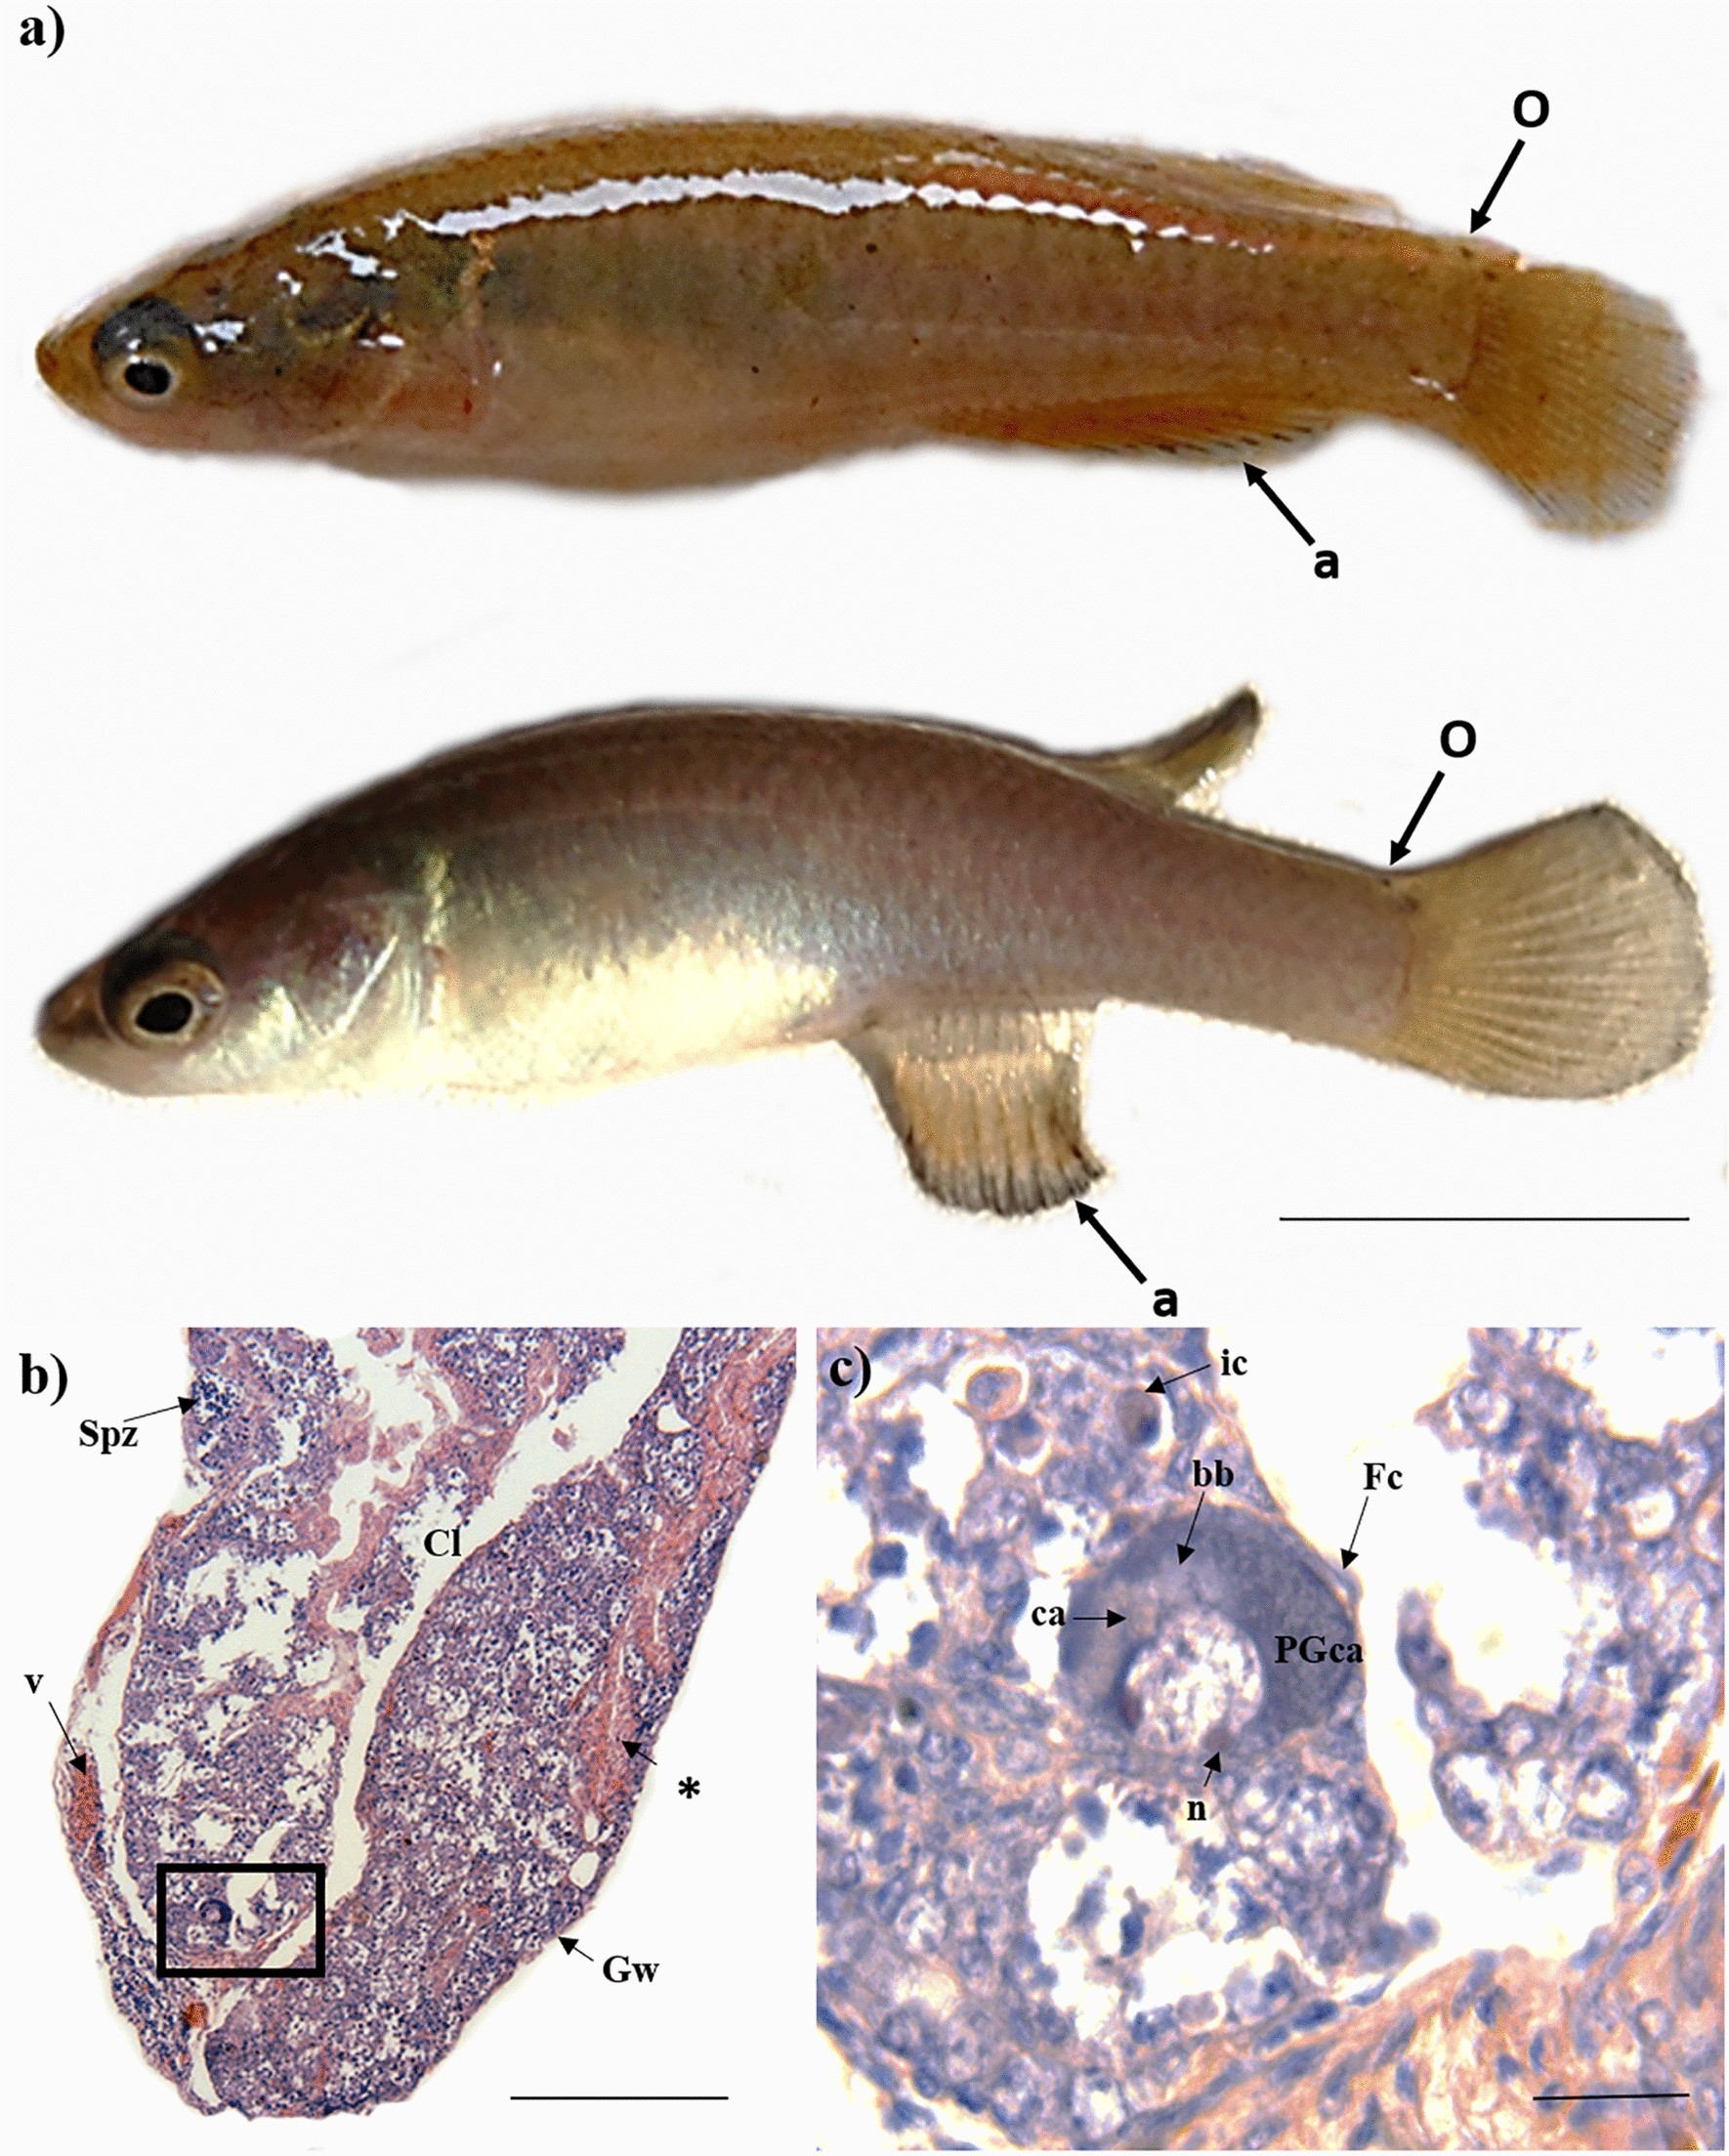 Protogynous functional hermaphroditism in the North American annual  killifish, Millerichthys robustus | Scientific Reports